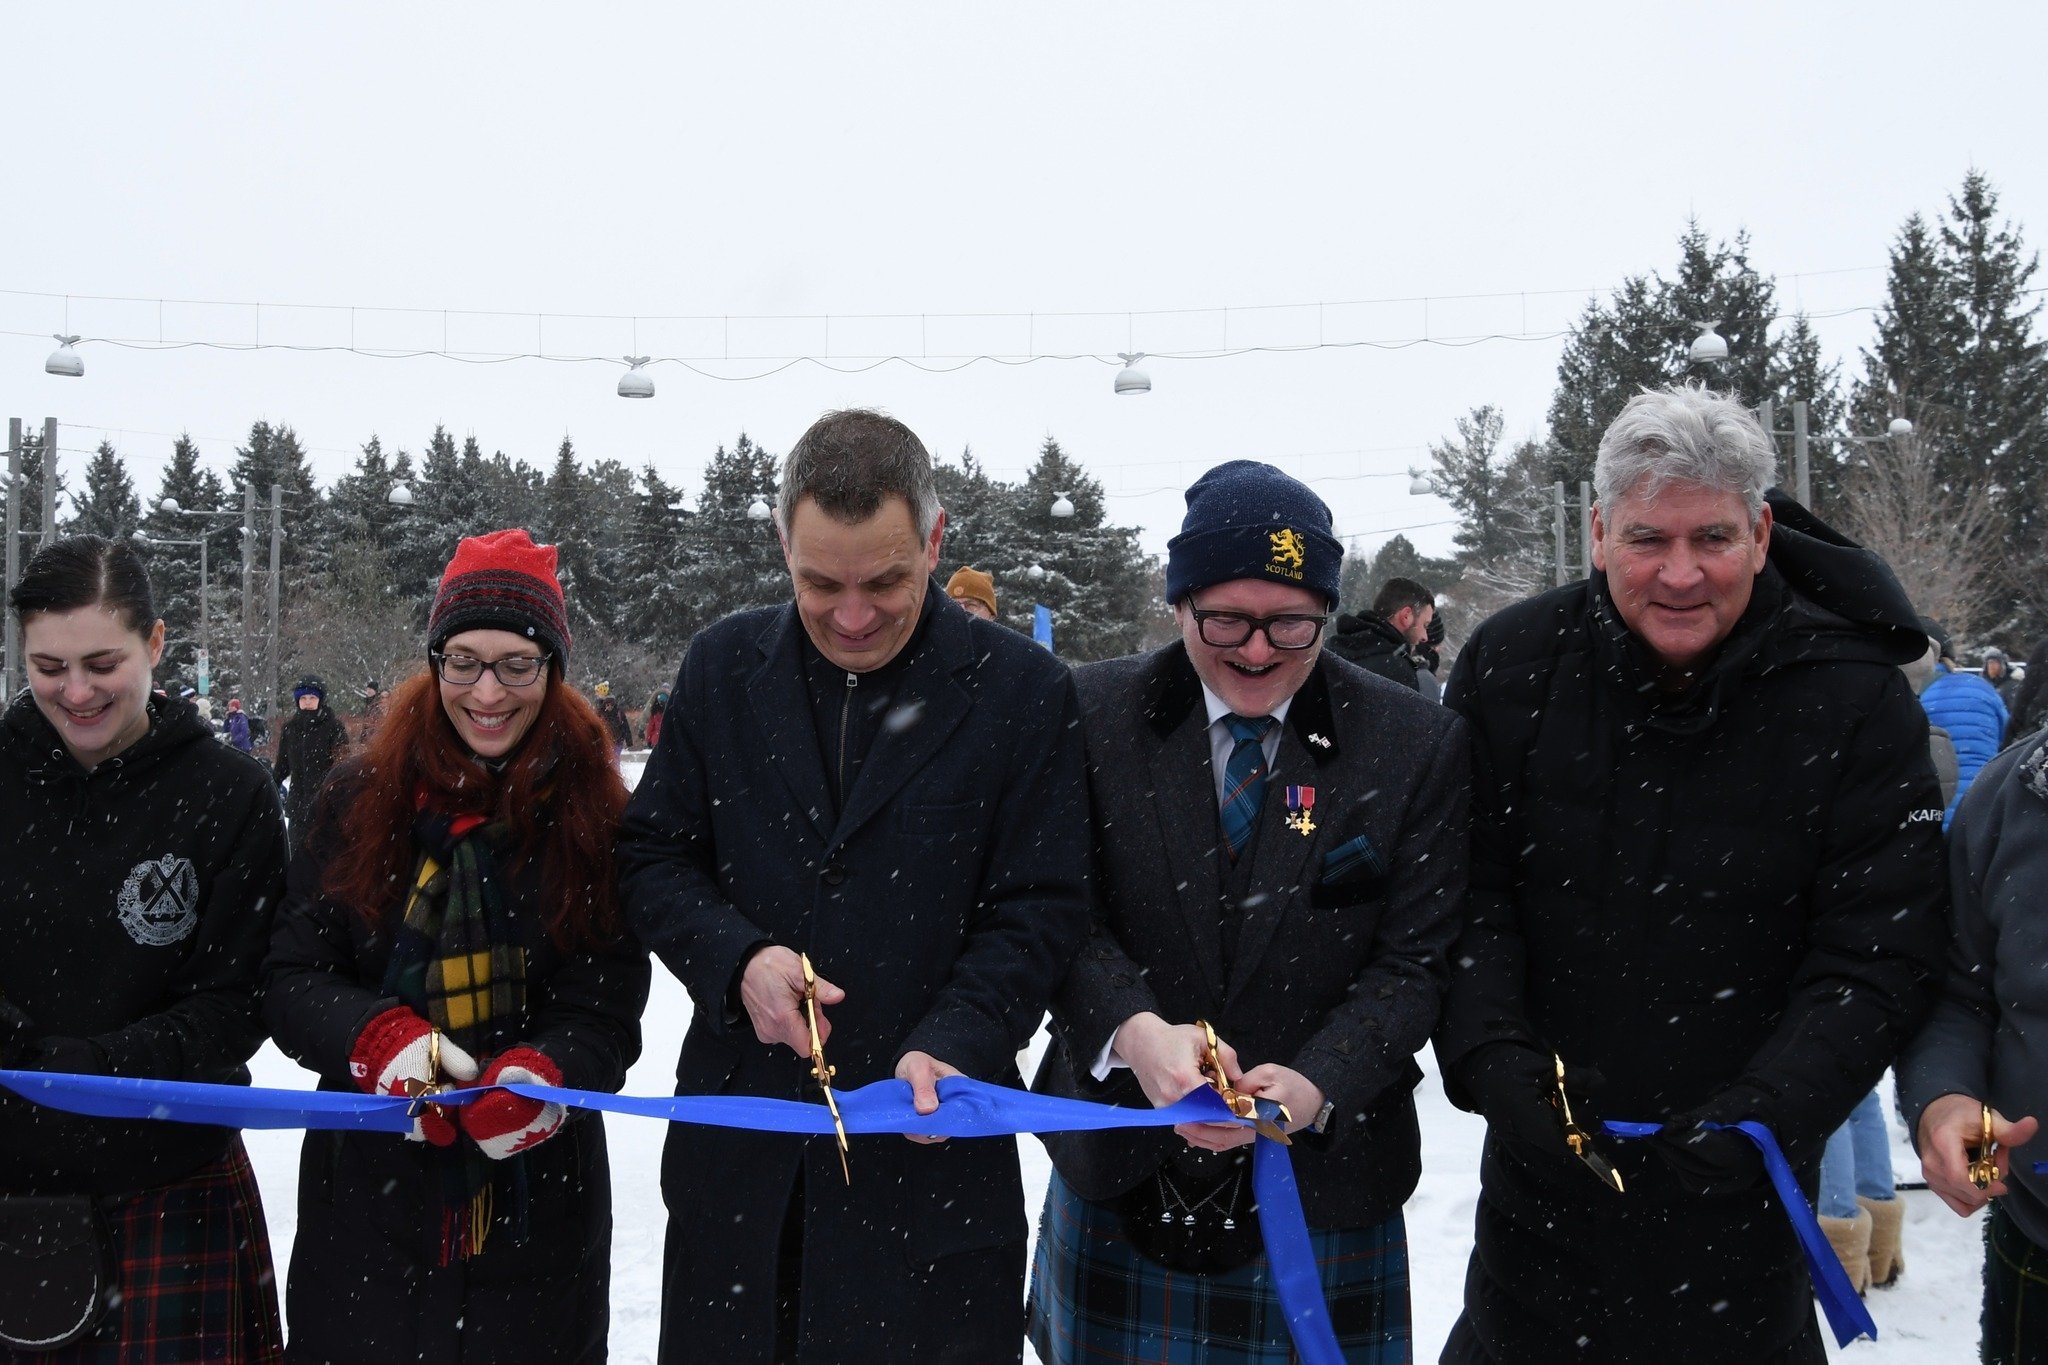 Cutting the Ribbon with MPP John Fraser